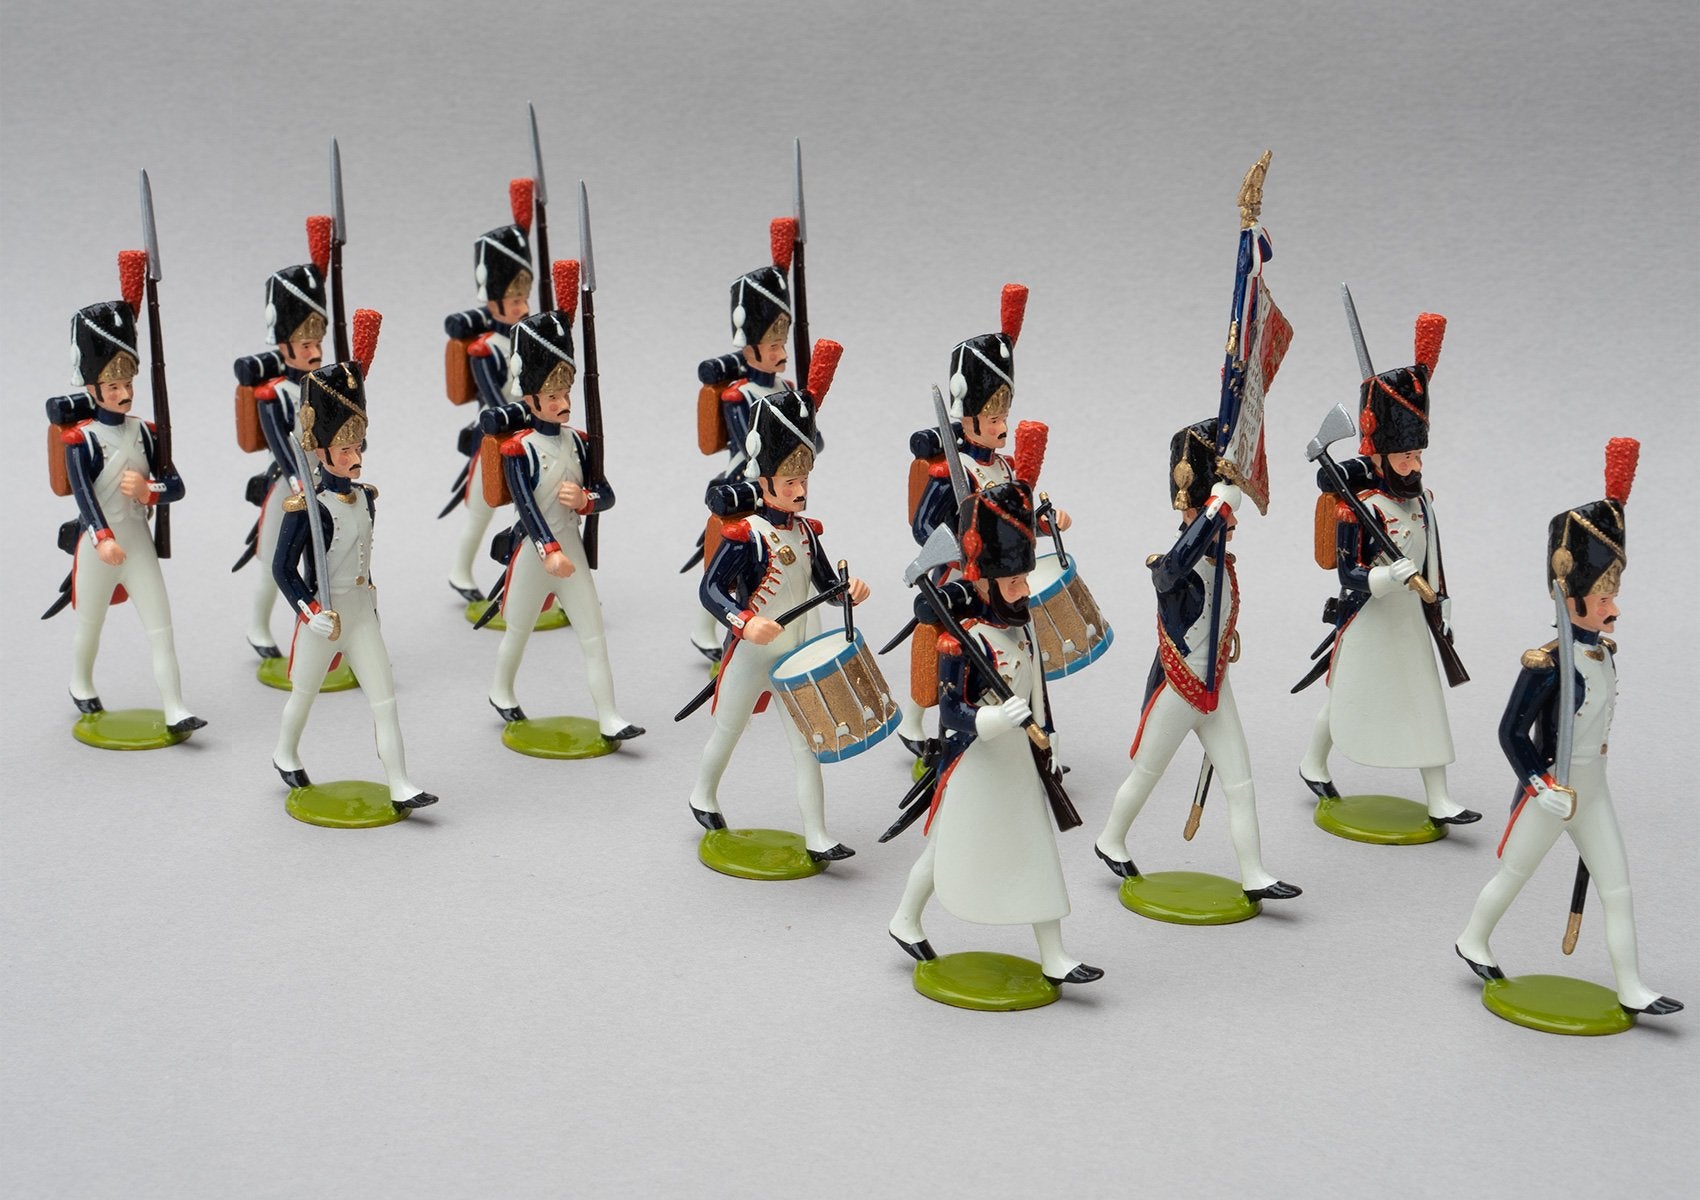 Set 110 Grenadiers à Pied, Head of Column, 1st Empire | French Infantry | Napoleonic Wars | Combined sets 110 and 107 showing 12 Grenadiers a pied at Head of Column | Waterloo | © Imperial Productions | Sculpt by David Cowe